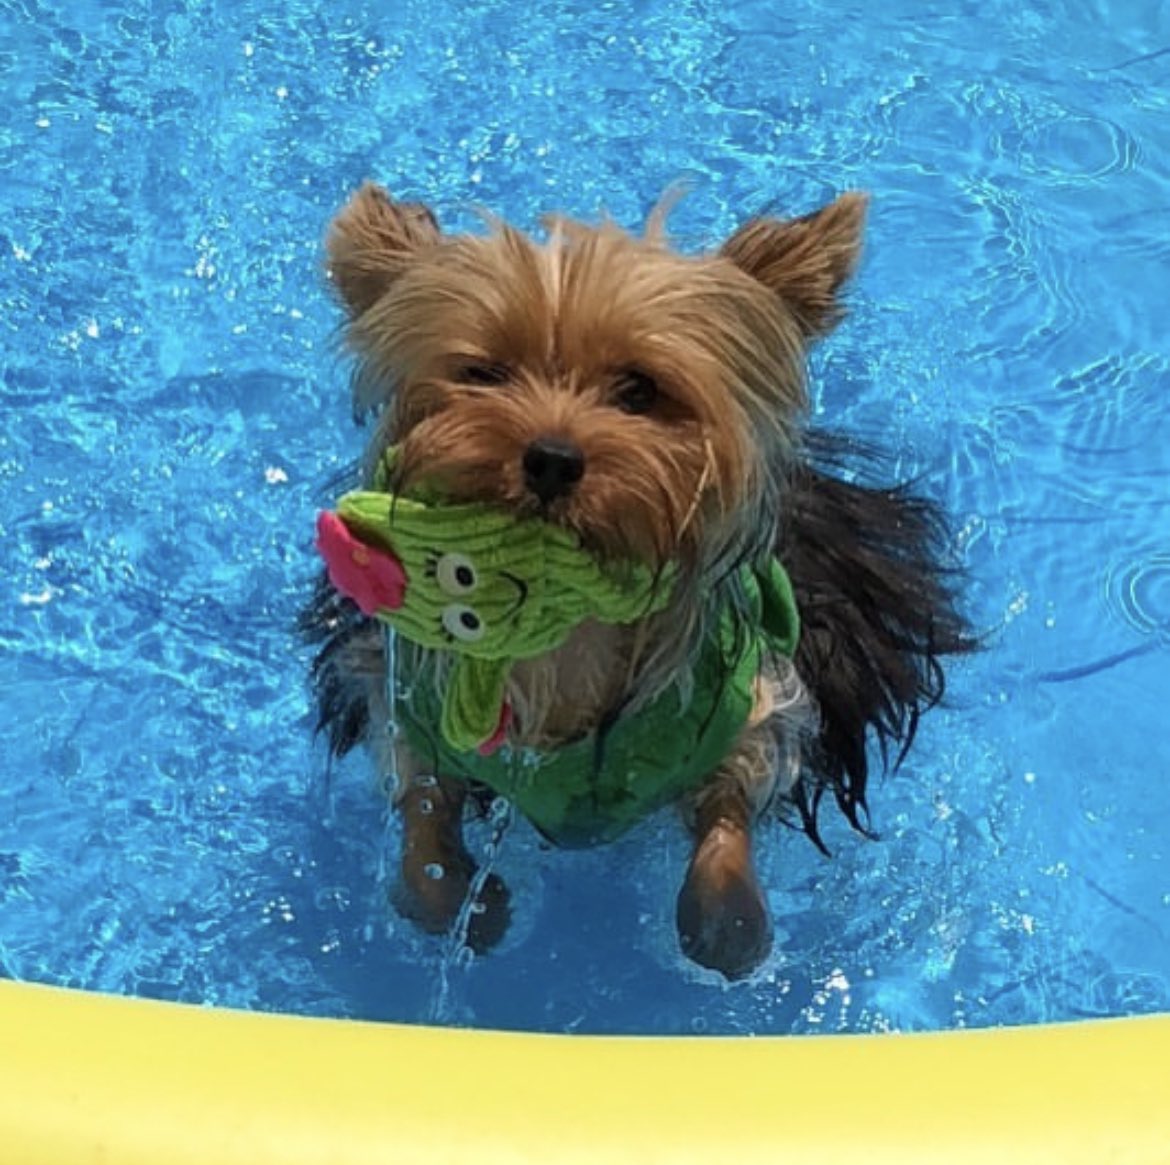 Swimming with my toy ❤️ who wants to join? #Friday #Friyay #swimming #cute #love #DogsOfTwitter #DogsOnTwitter #dogsarefamily